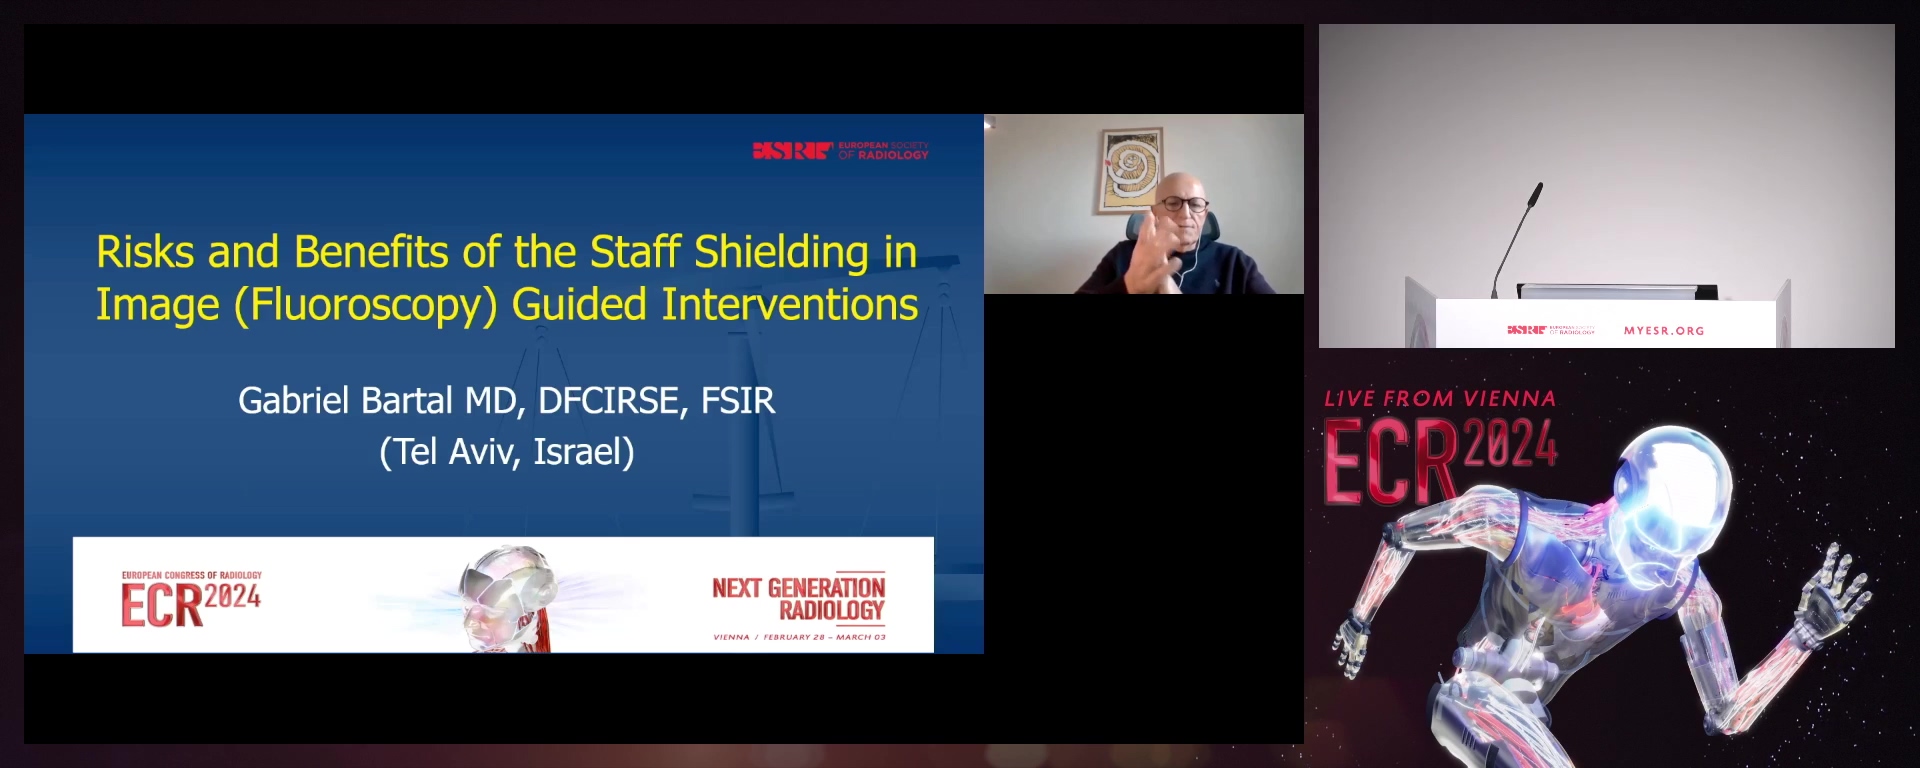 Risks and benefits of the staff shielding in image (fluoroscopy) guided interventions